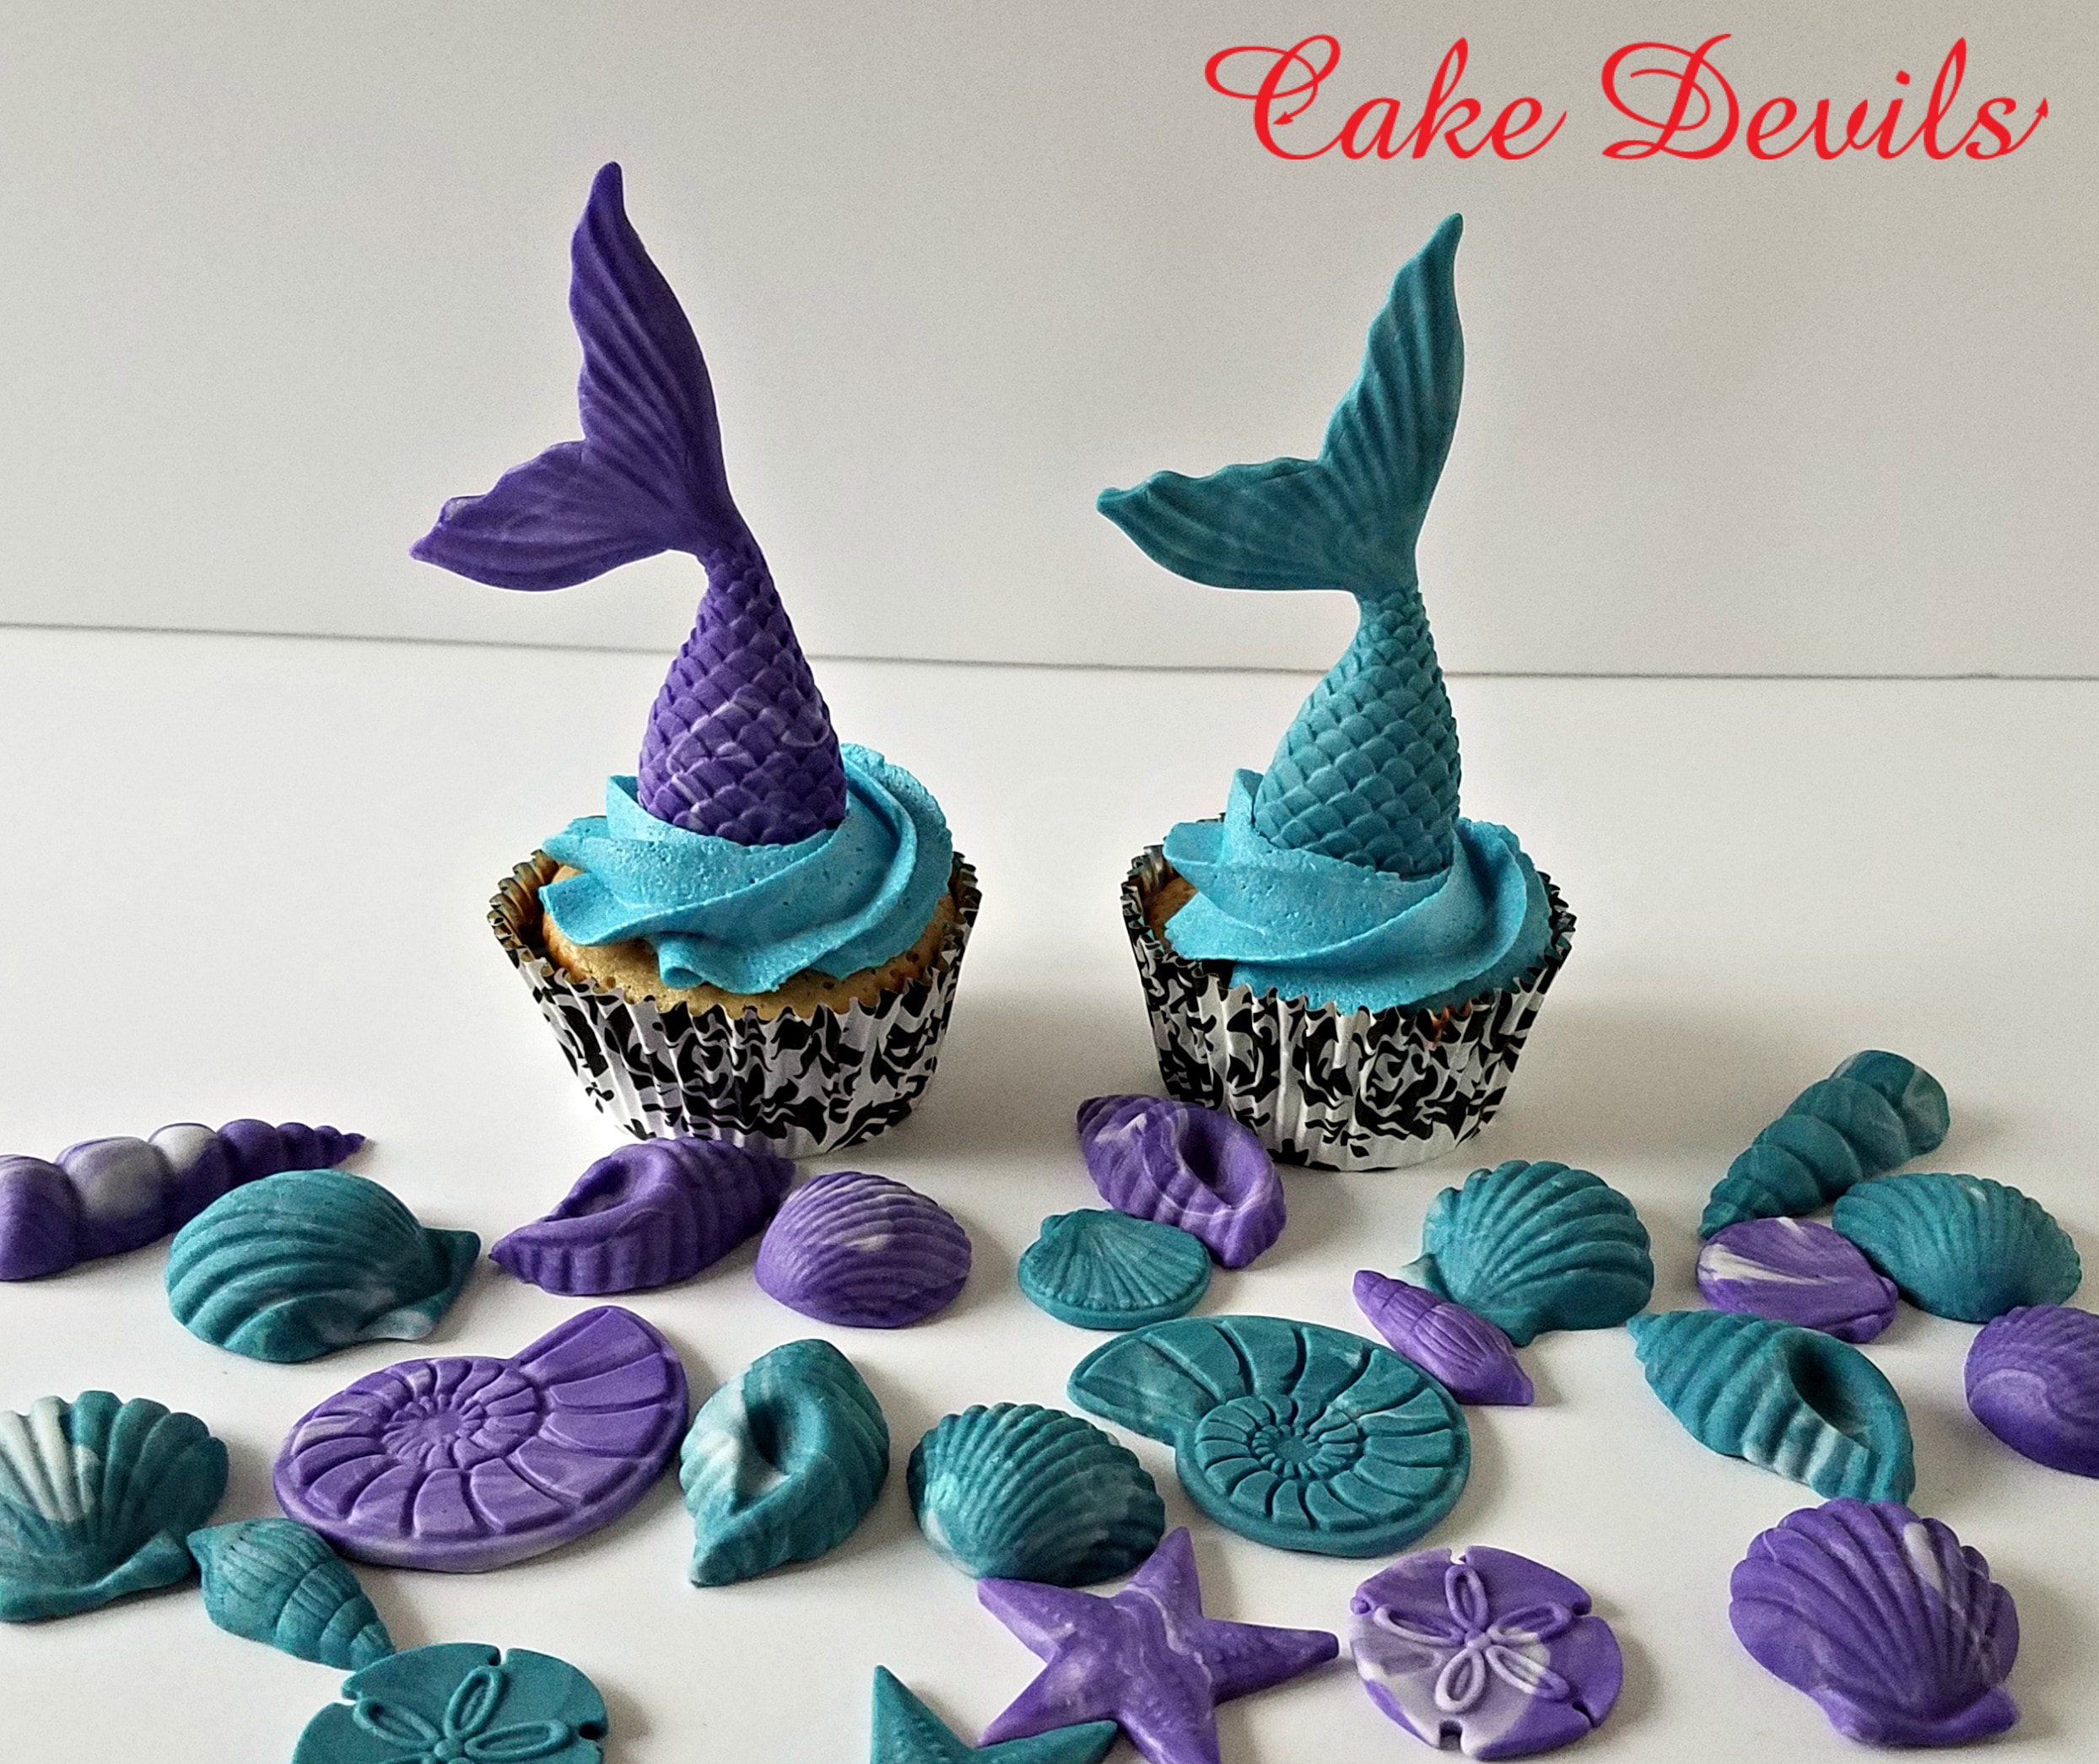 Mermaid Tails and Sea Shells Fondant Cupcake Toppers, Under the Sea Cupcake  Decorations, Mermaid Cake Decorations, Fondant Mermaid Tails